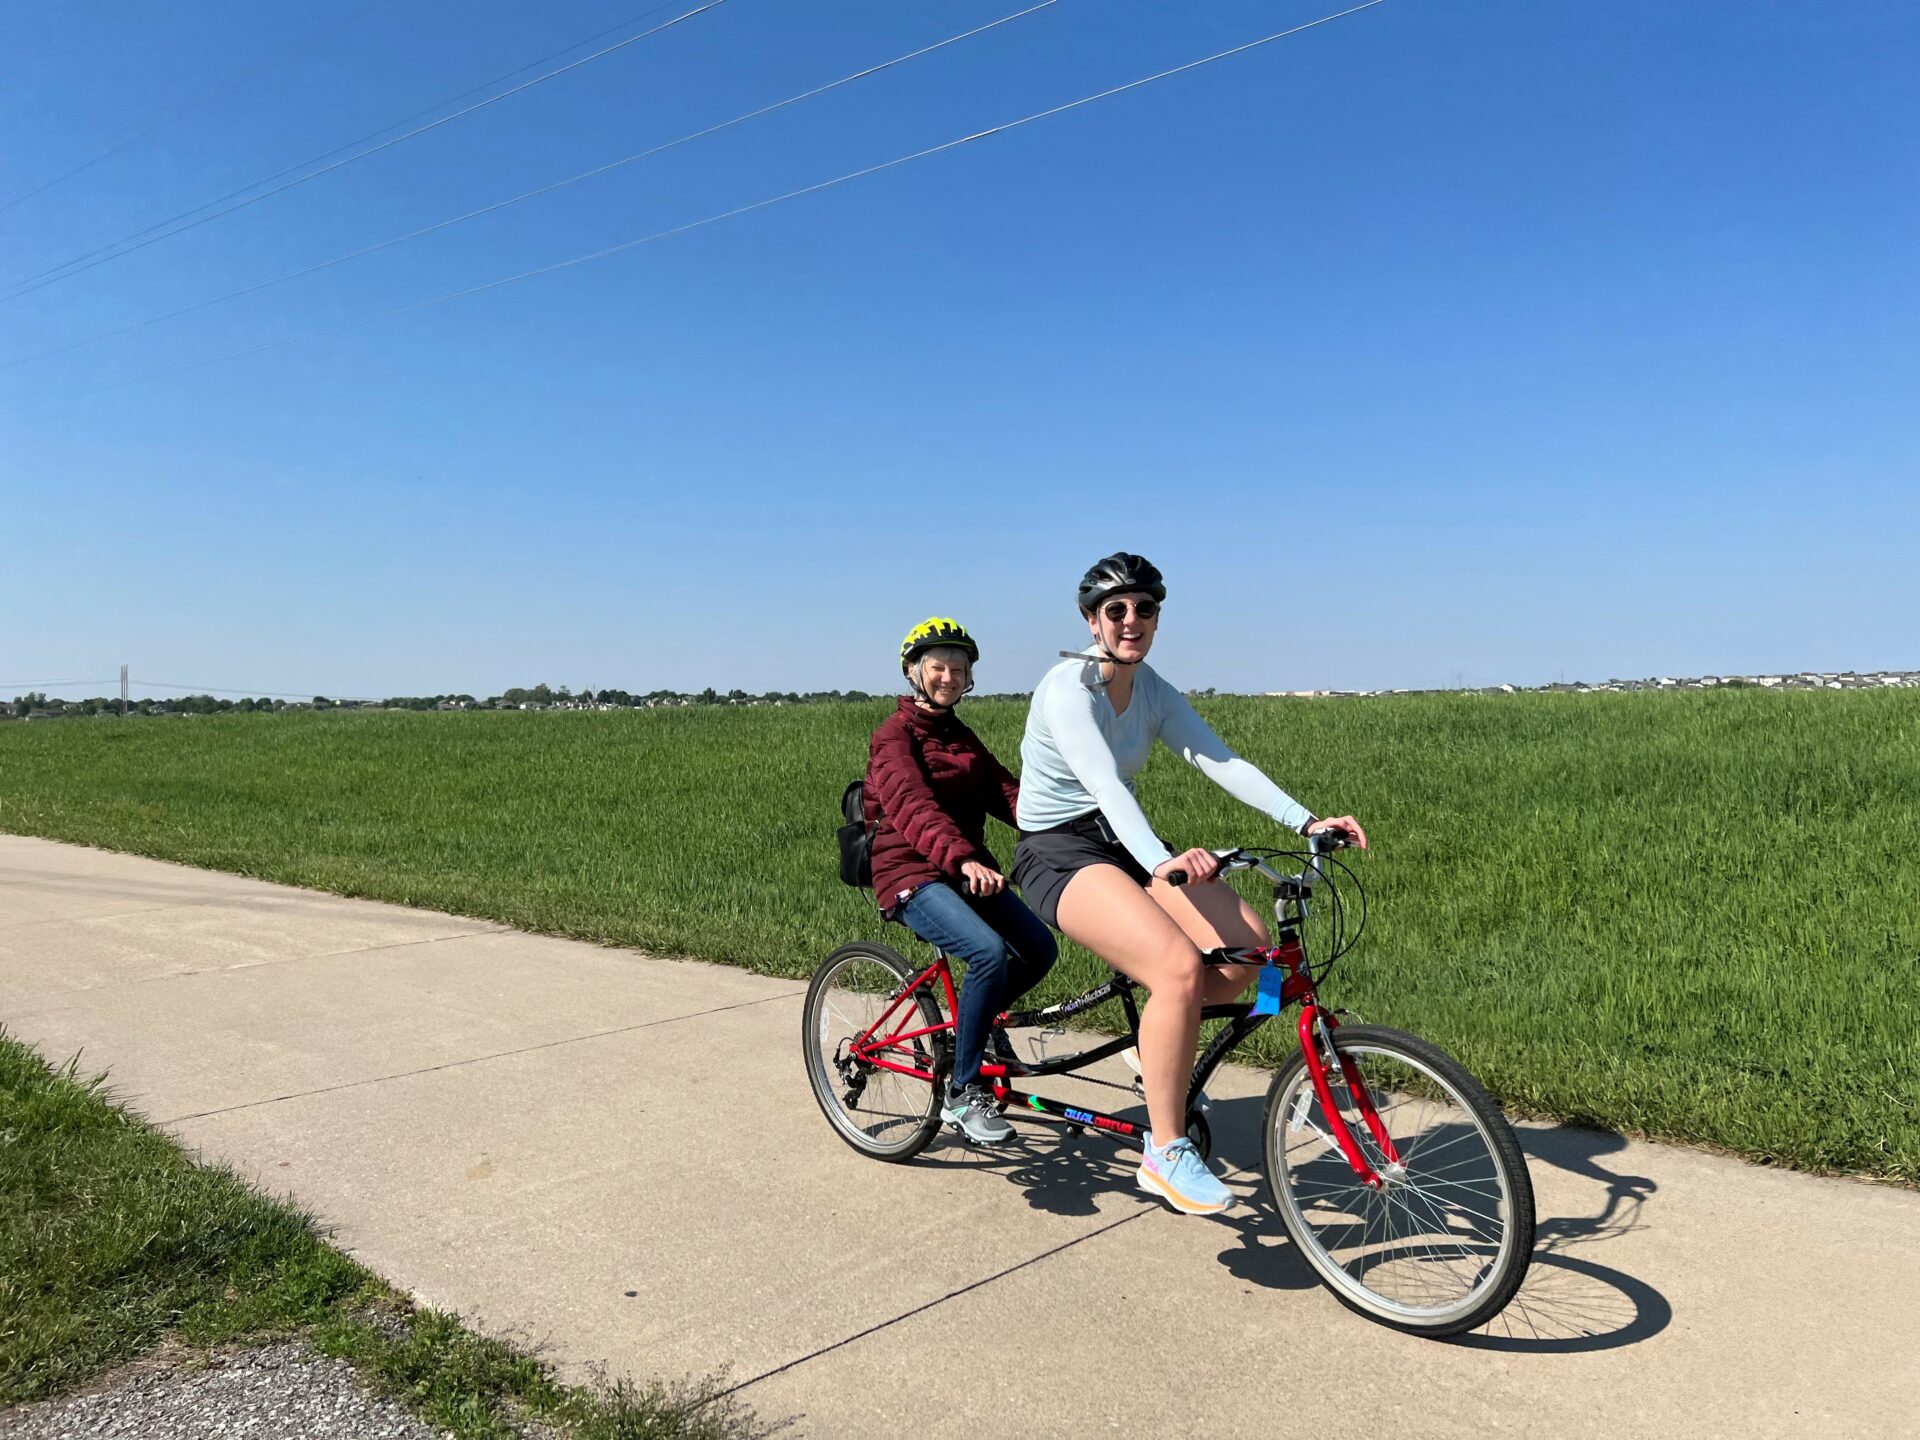 Two ladies riding a tandem bike with two seats. They are wearing helmets and smiling on a trail with grass in the background.